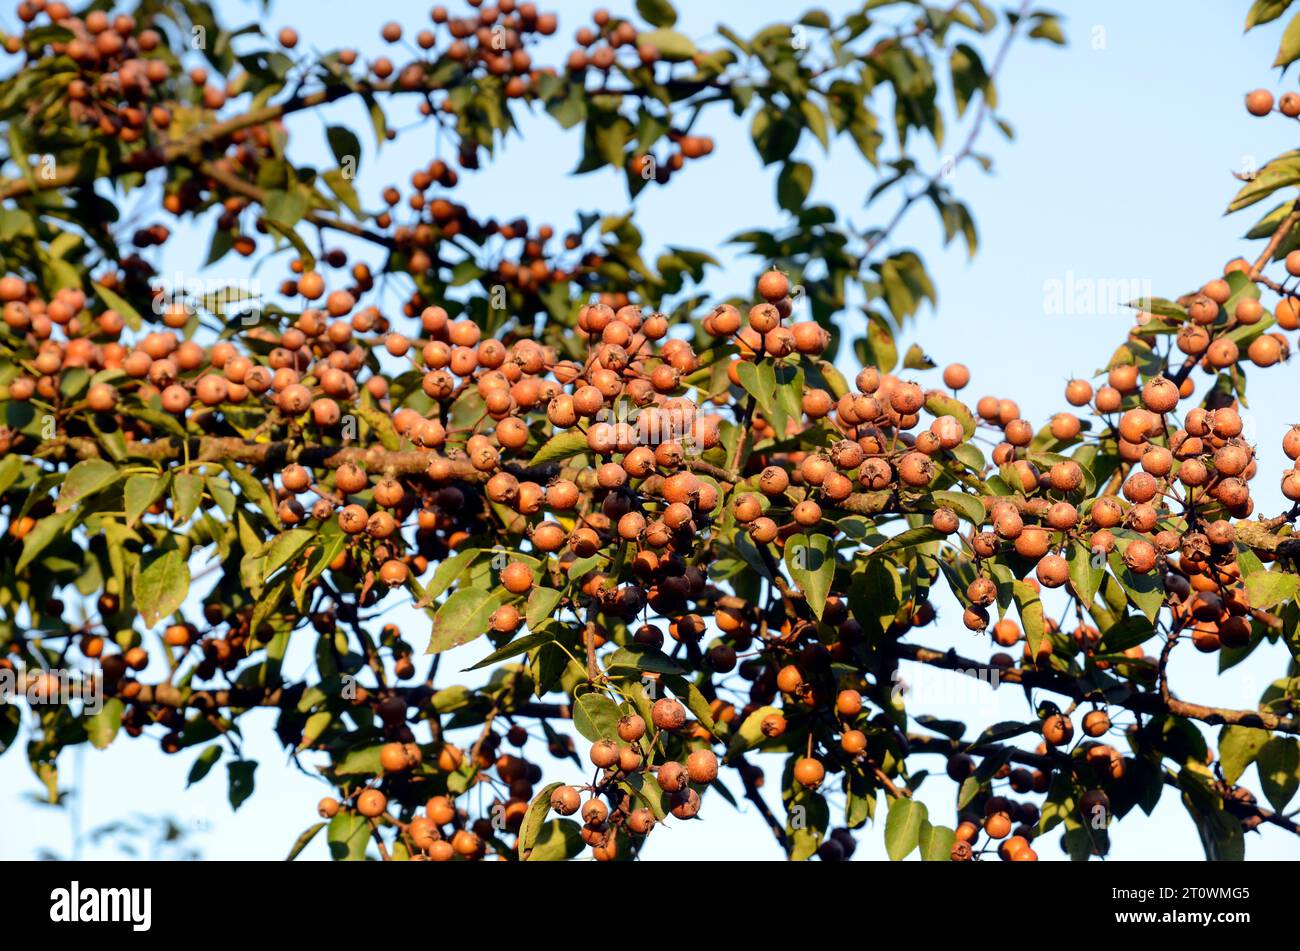 The Plymouth pear or wild pear tree (Pyrus cordata) with branches loaded with fruits. Stock Photo